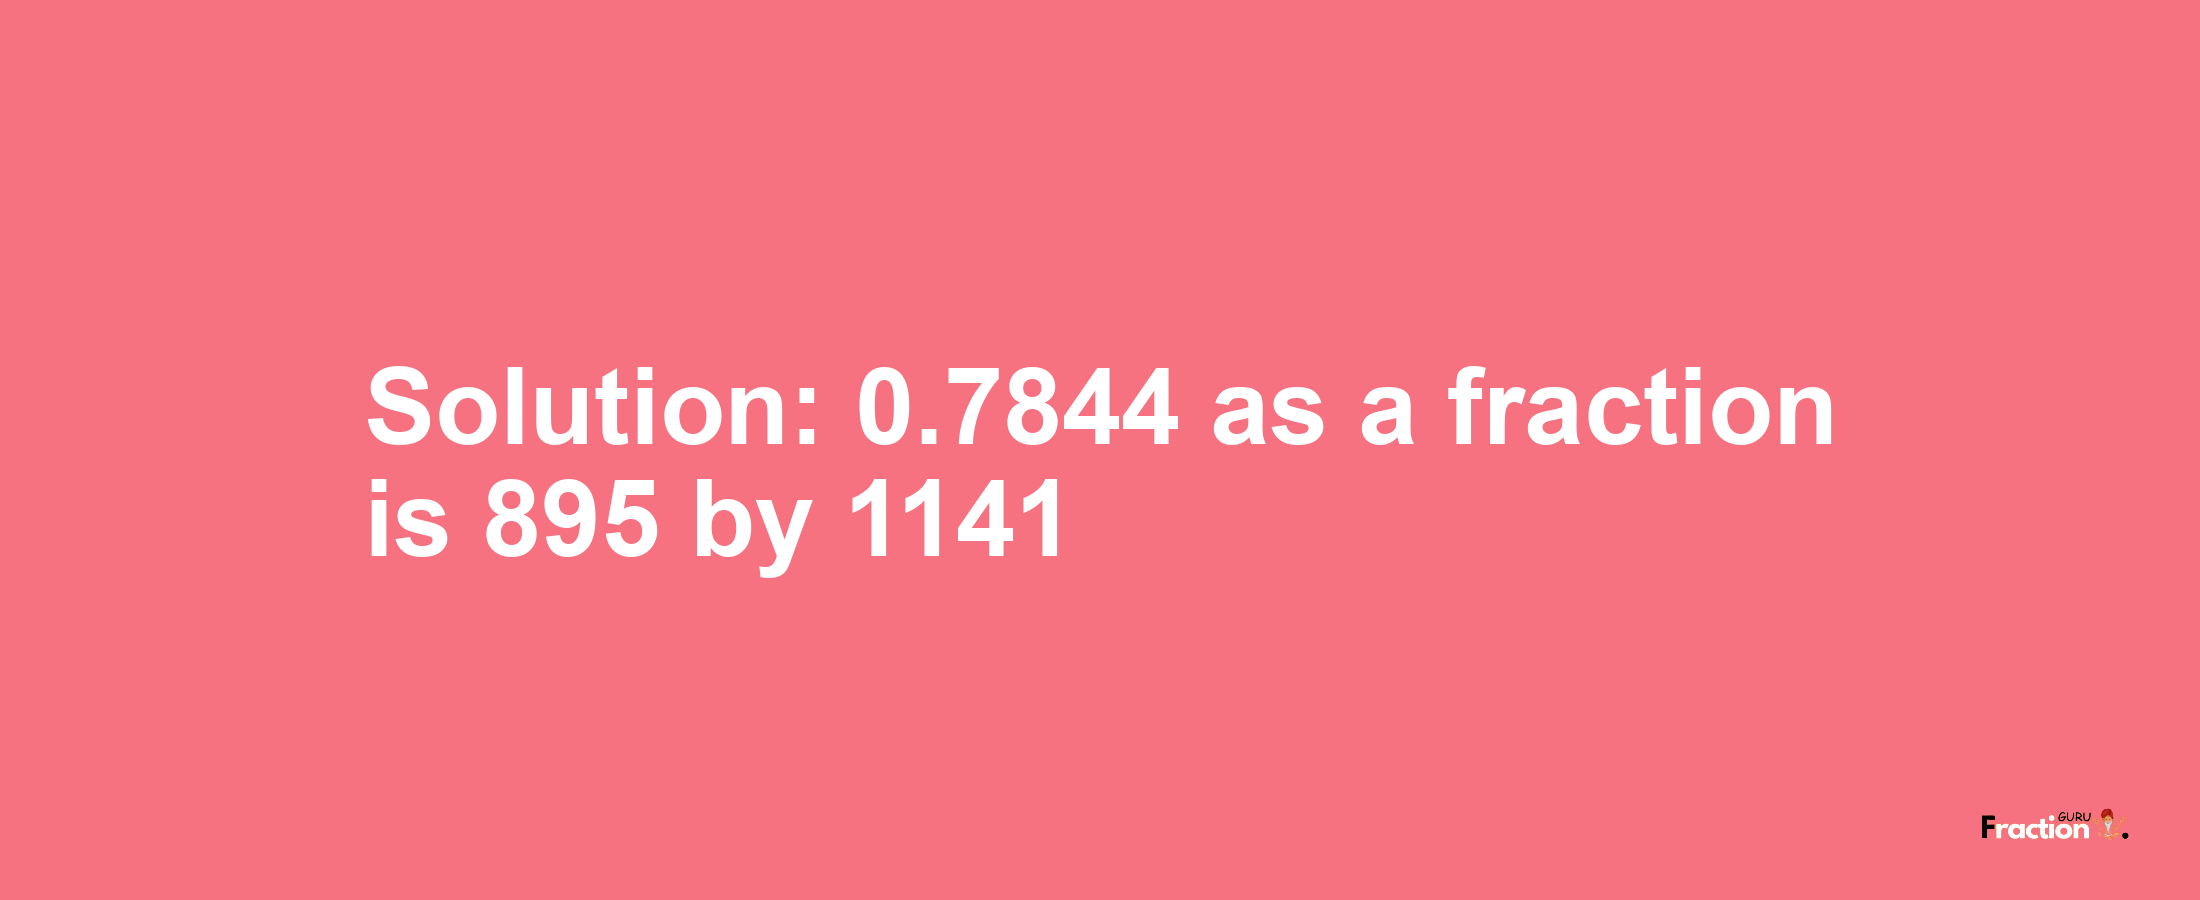 Solution:0.7844 as a fraction is 895/1141